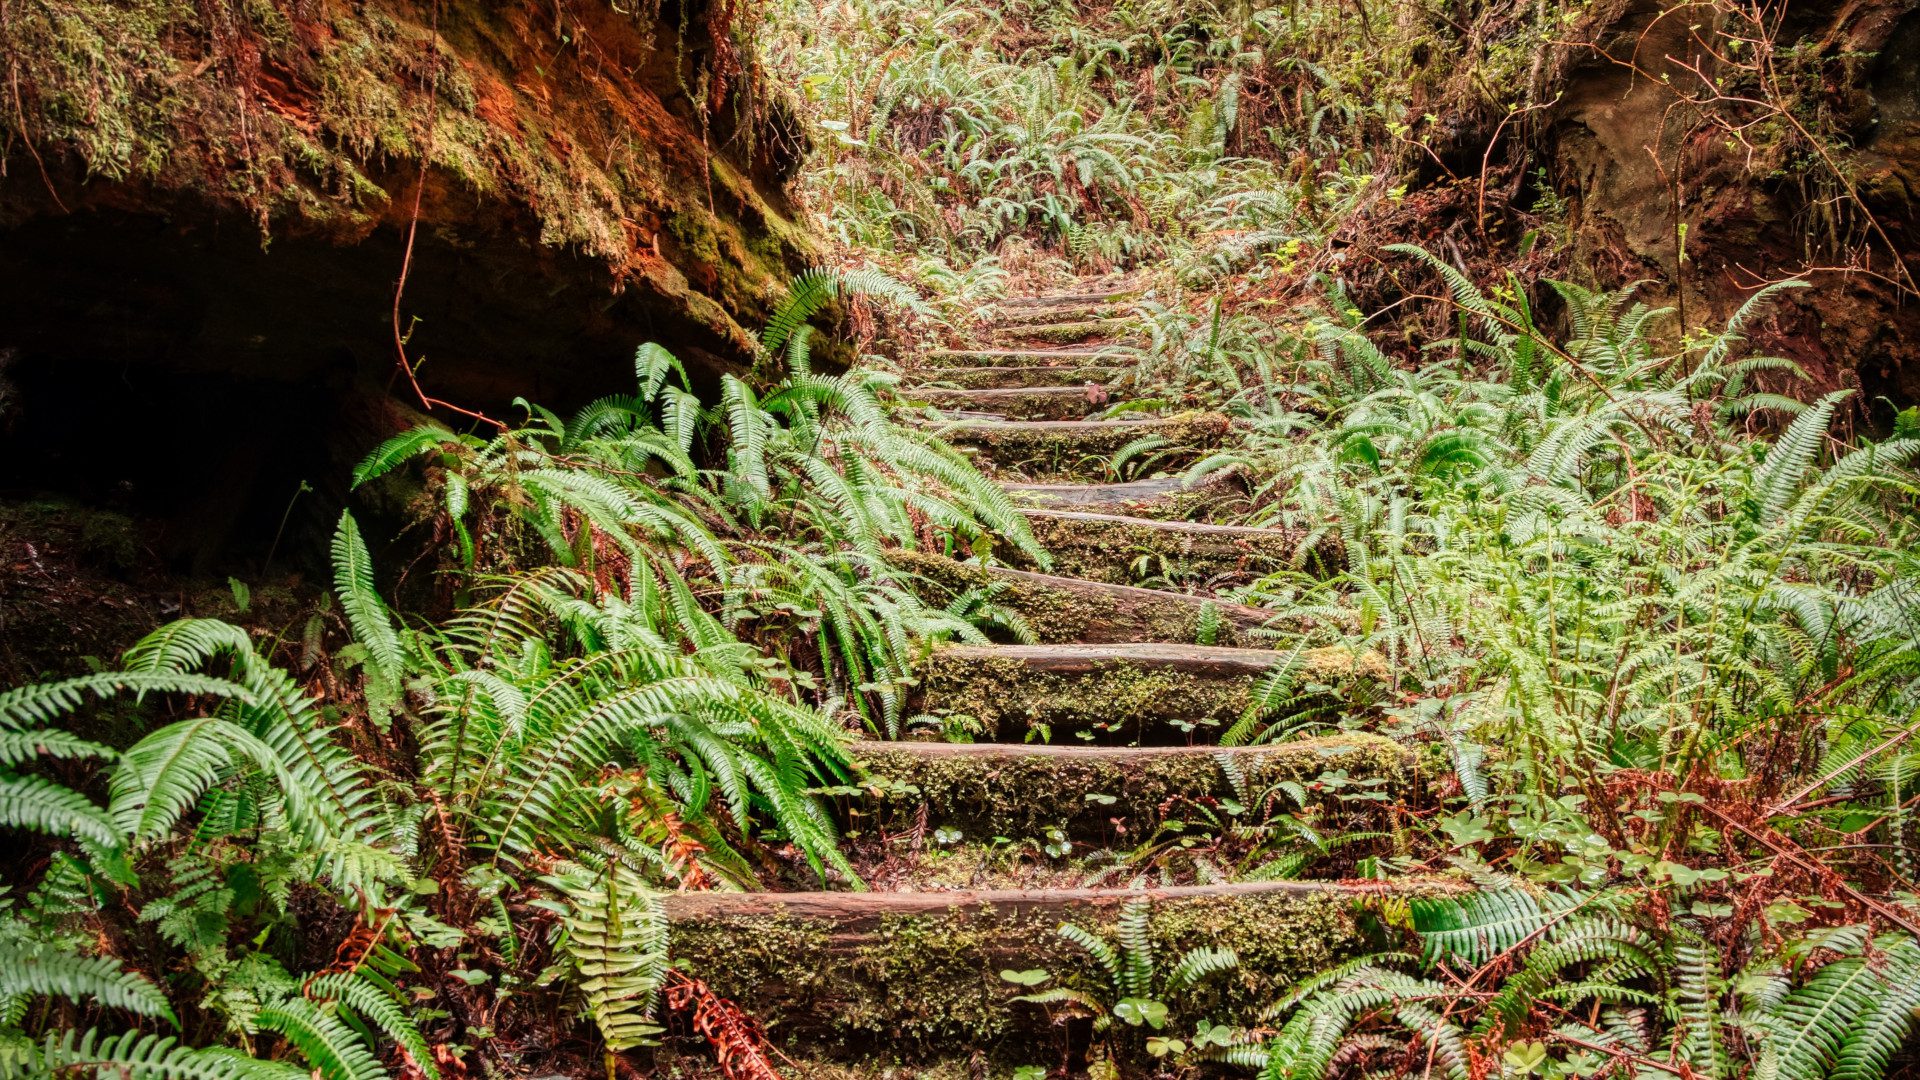 Fern-covered stairway in a forest